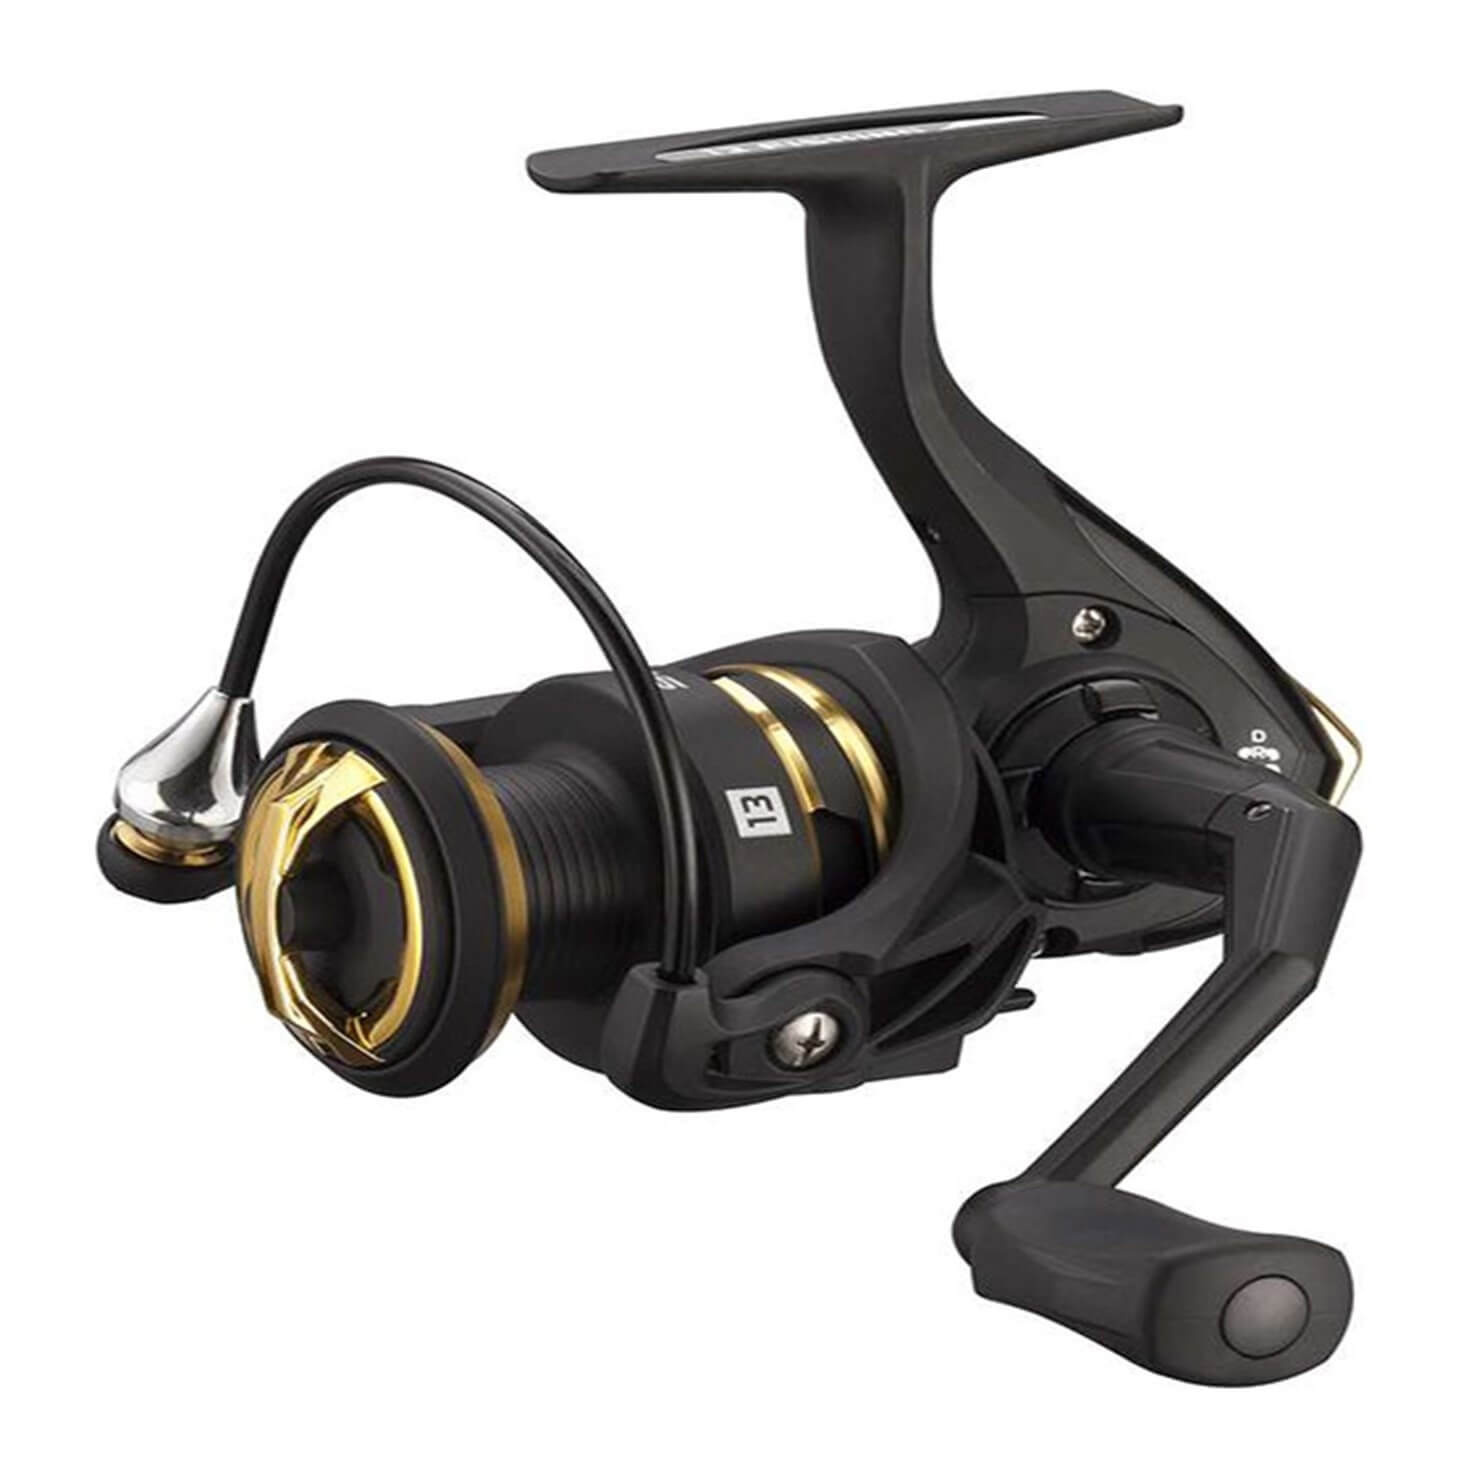 13 Fishing Source R Spinning Reel 2.0 Size - 5.2:1